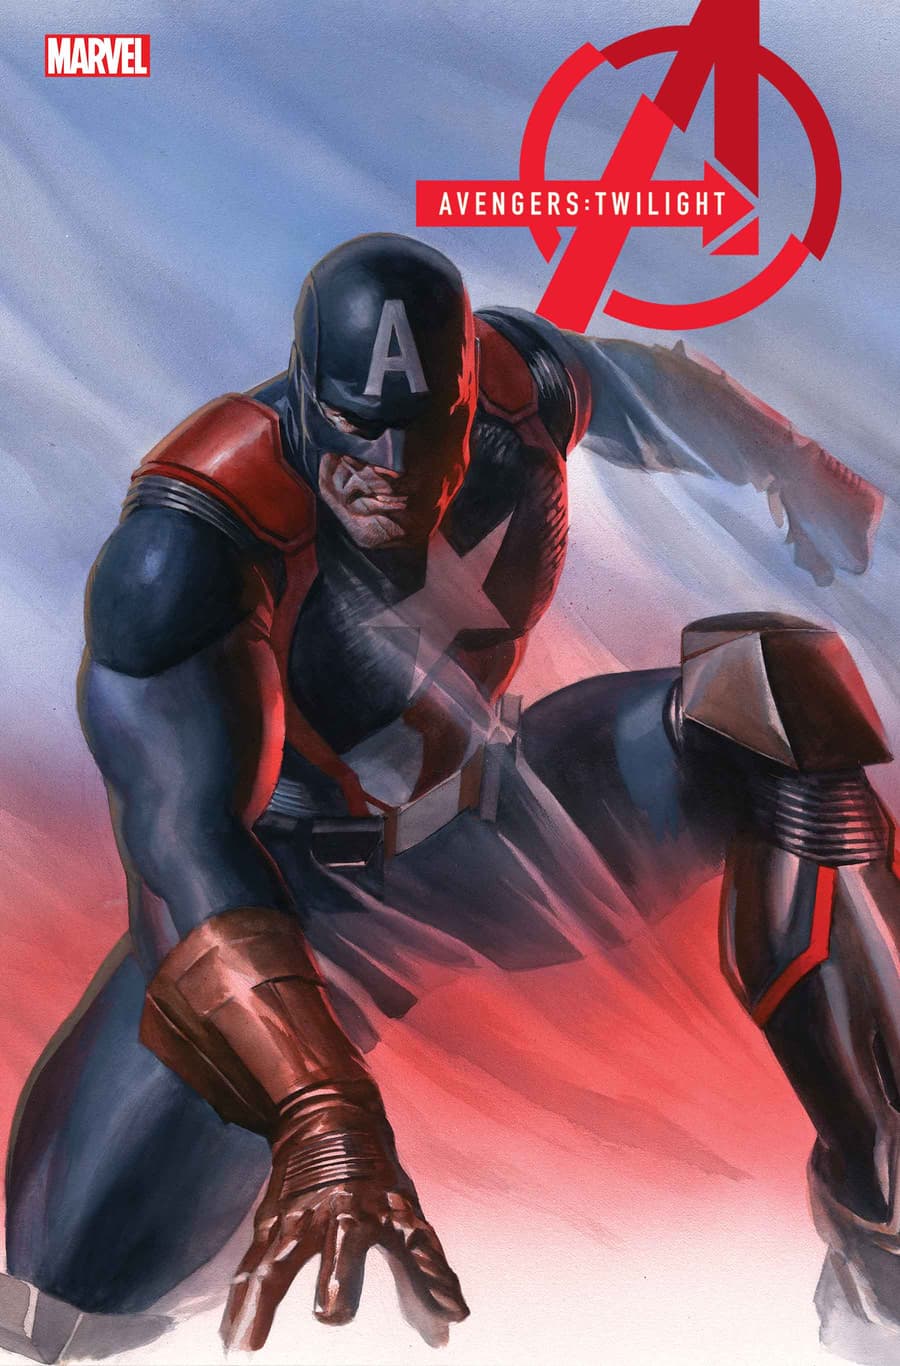 AVENGERS: TWILIGHT (2024) #1 Cover A by Alex Ross